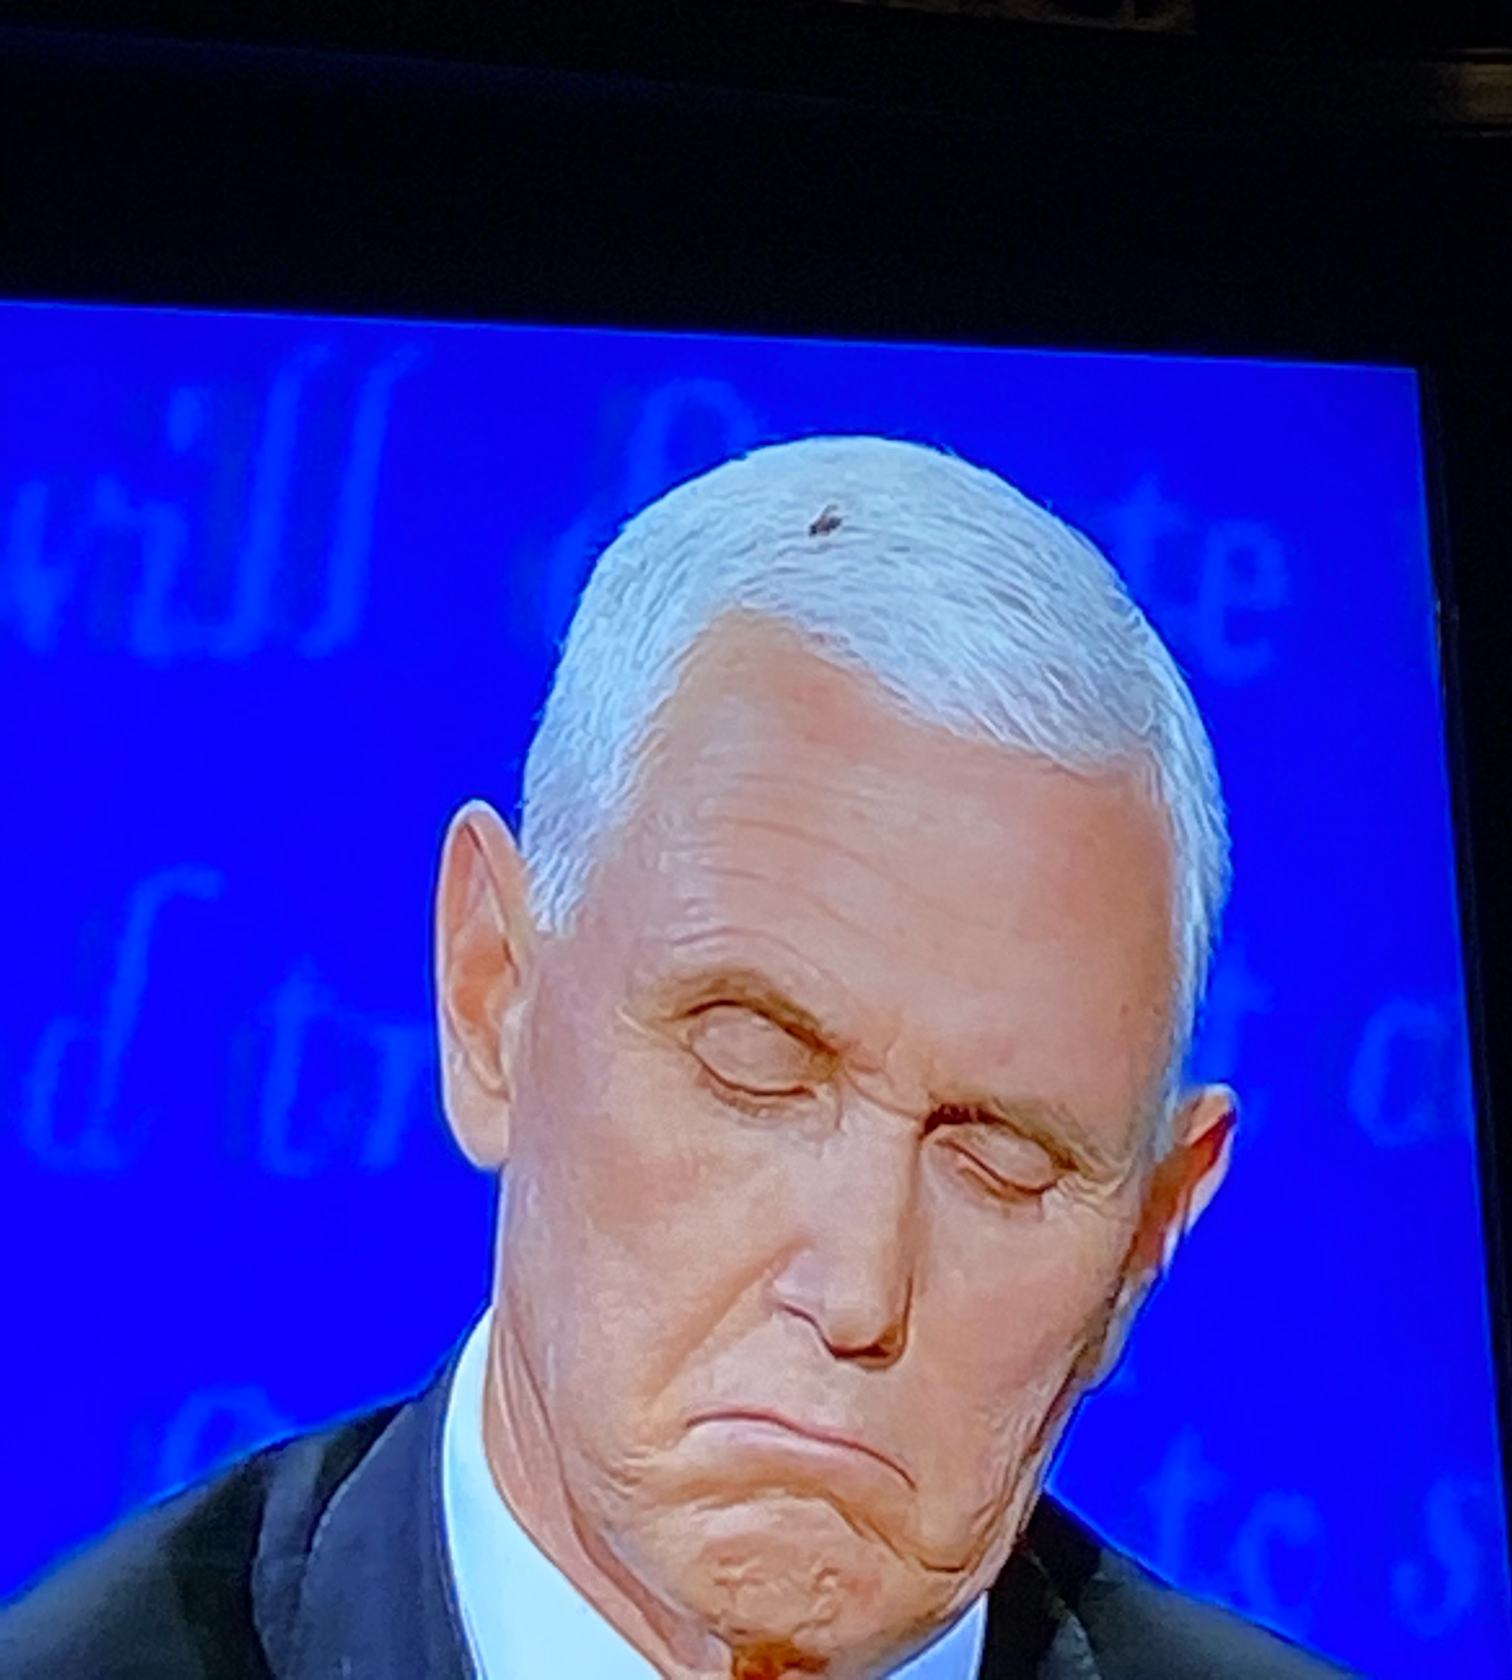 High Quality Fly on Mike pence head Blank Meme Template